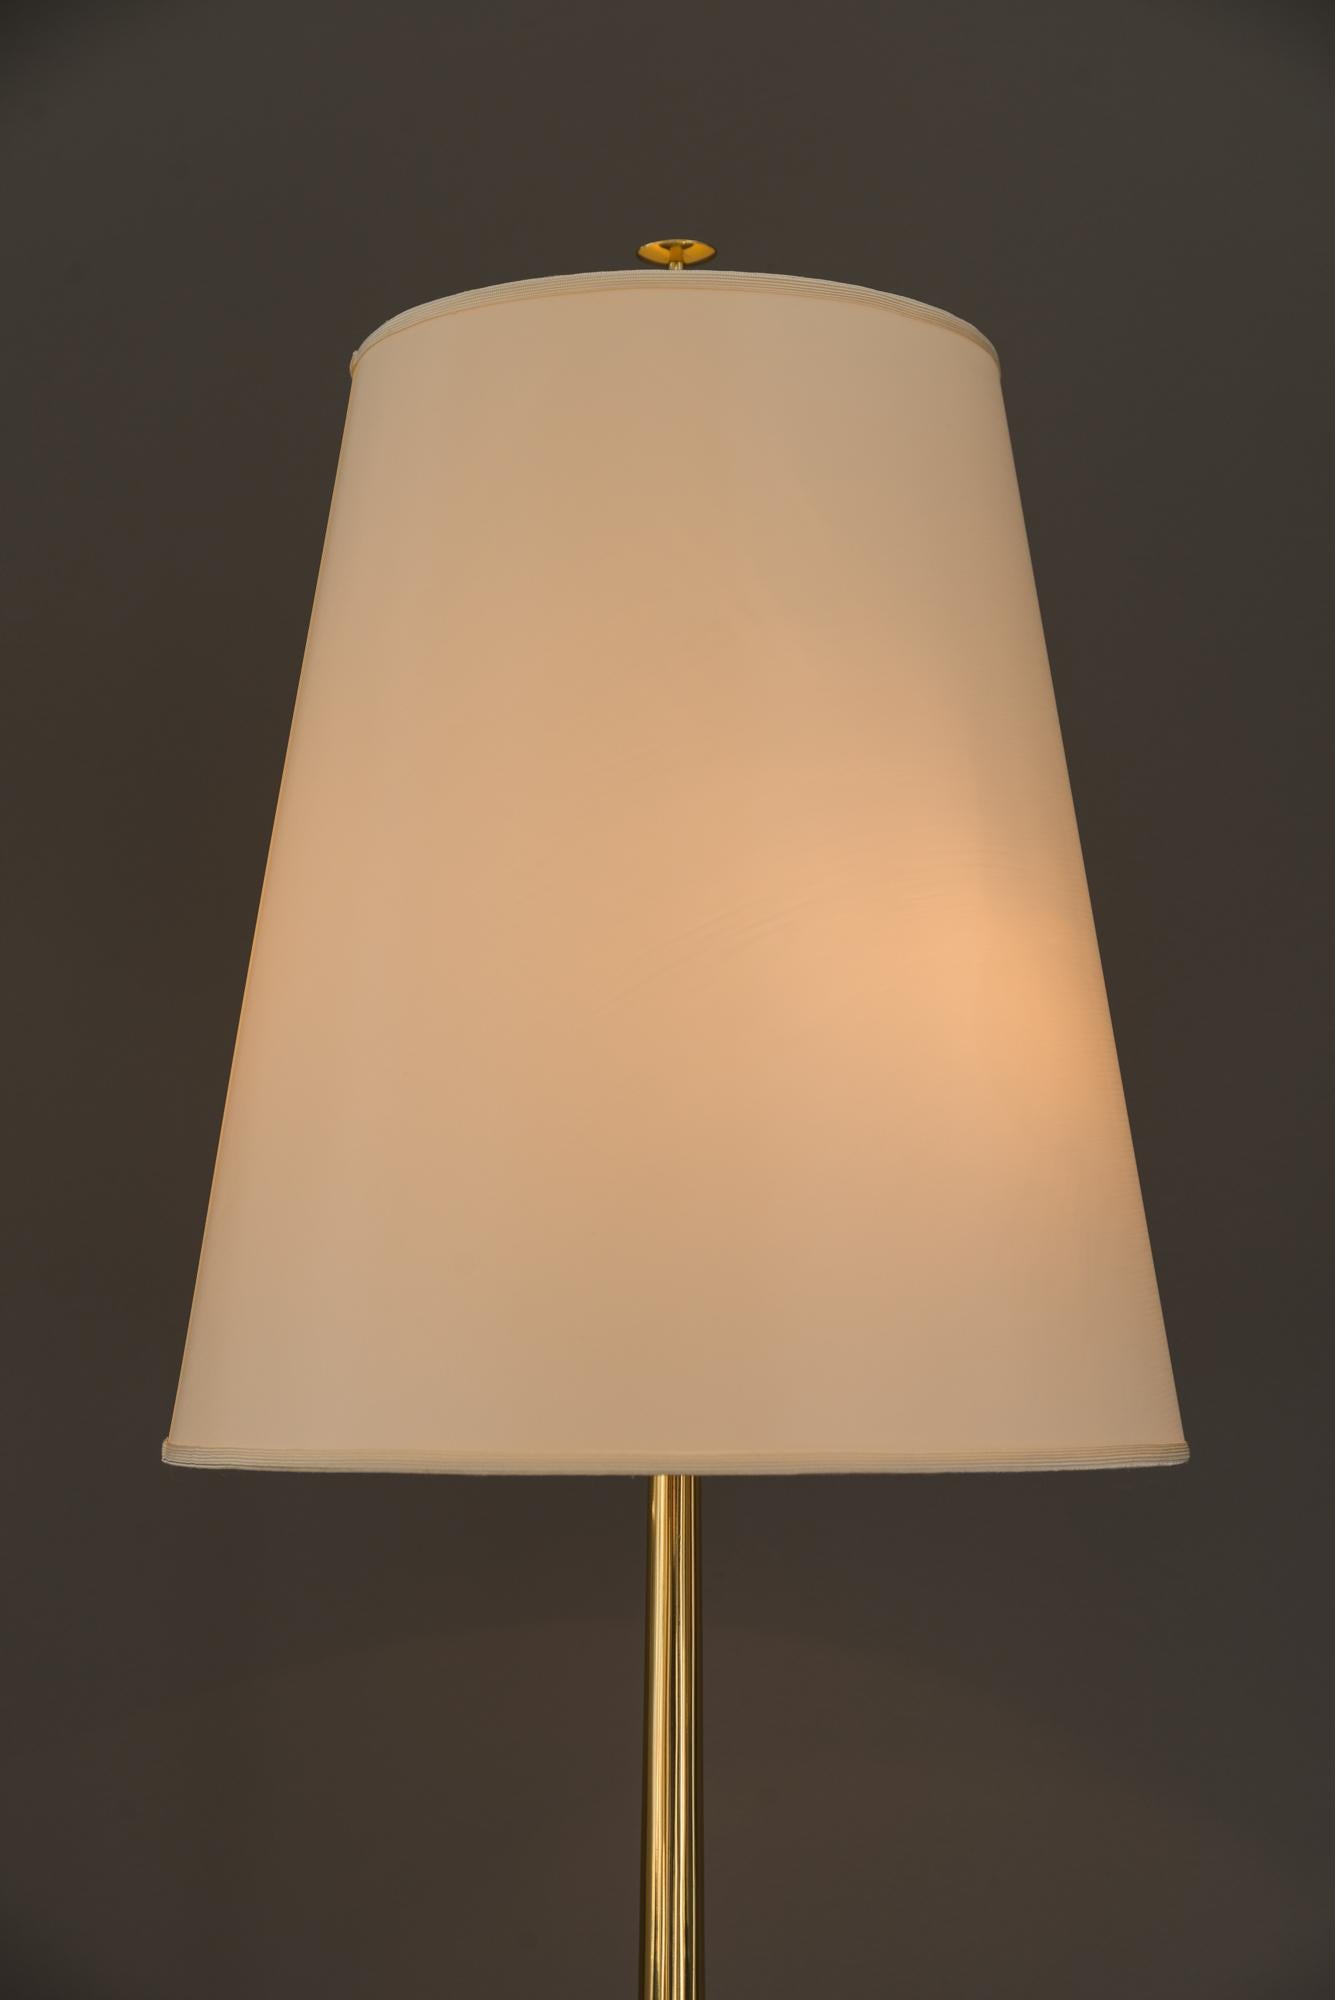 Rupert Nikoll Floor Lamp, circa 1950s In Good Condition For Sale In Wien, AT